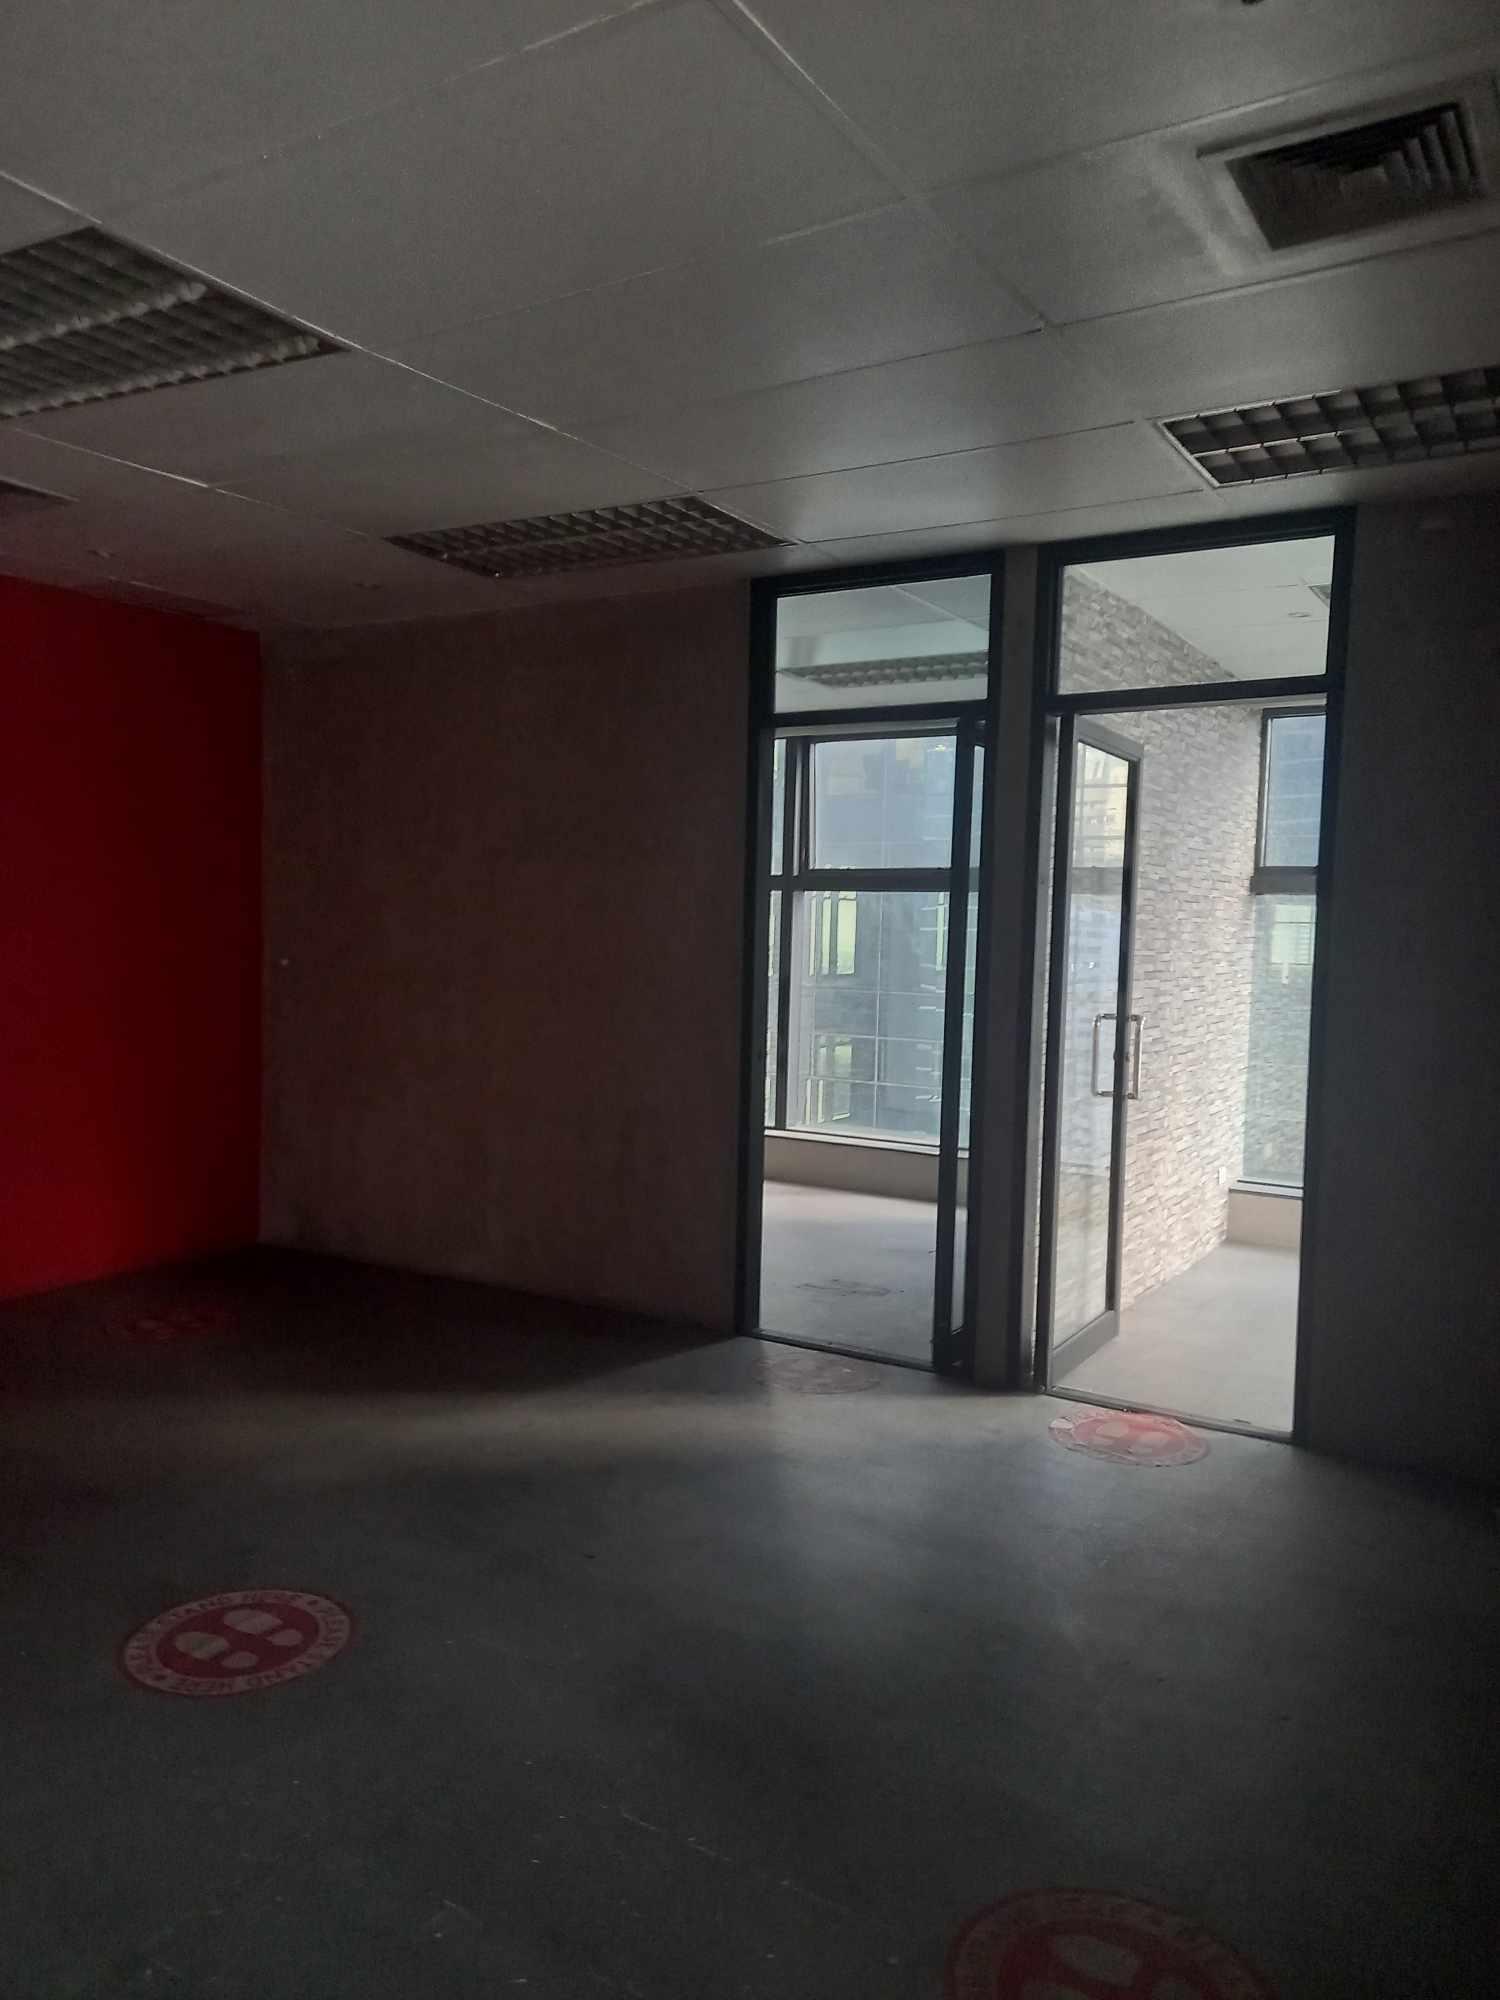 For Rent Lease 138 sqm Office Space Ortigas Pasig City